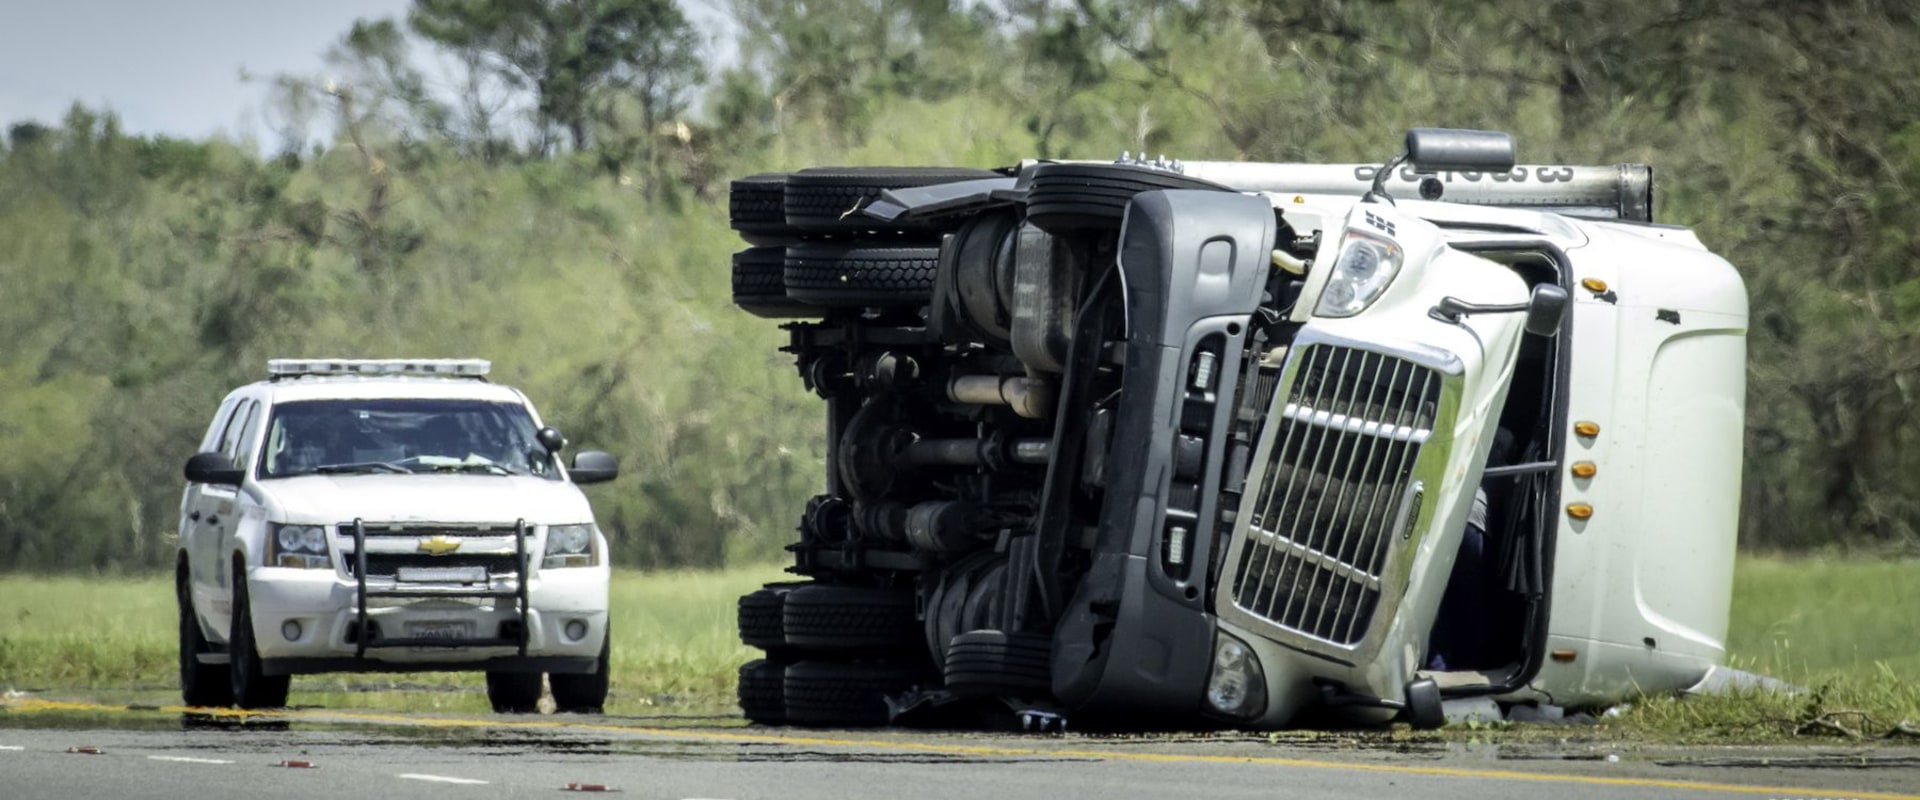 Are truck accidents increasing?